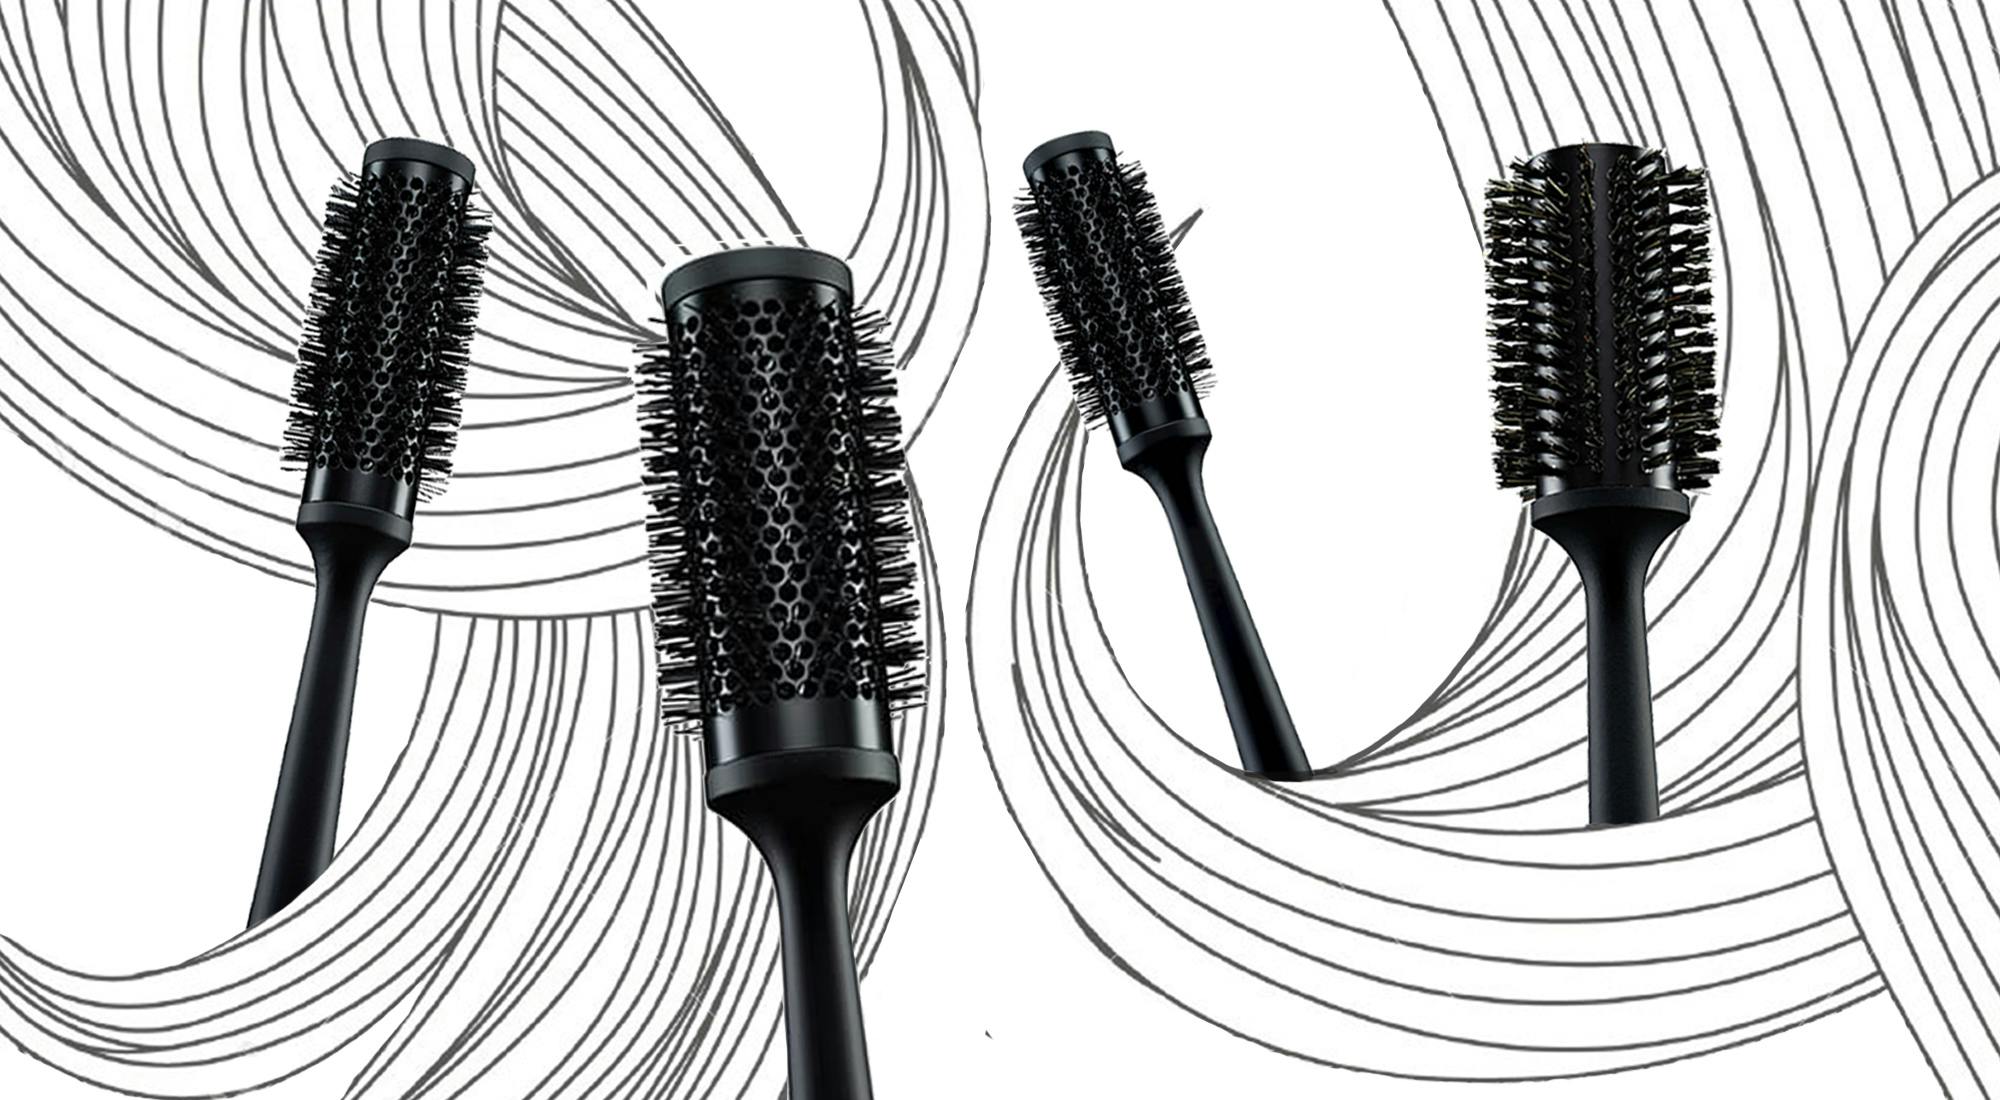 The Best Blow Dry Brush For Your Hair Blow Ltd